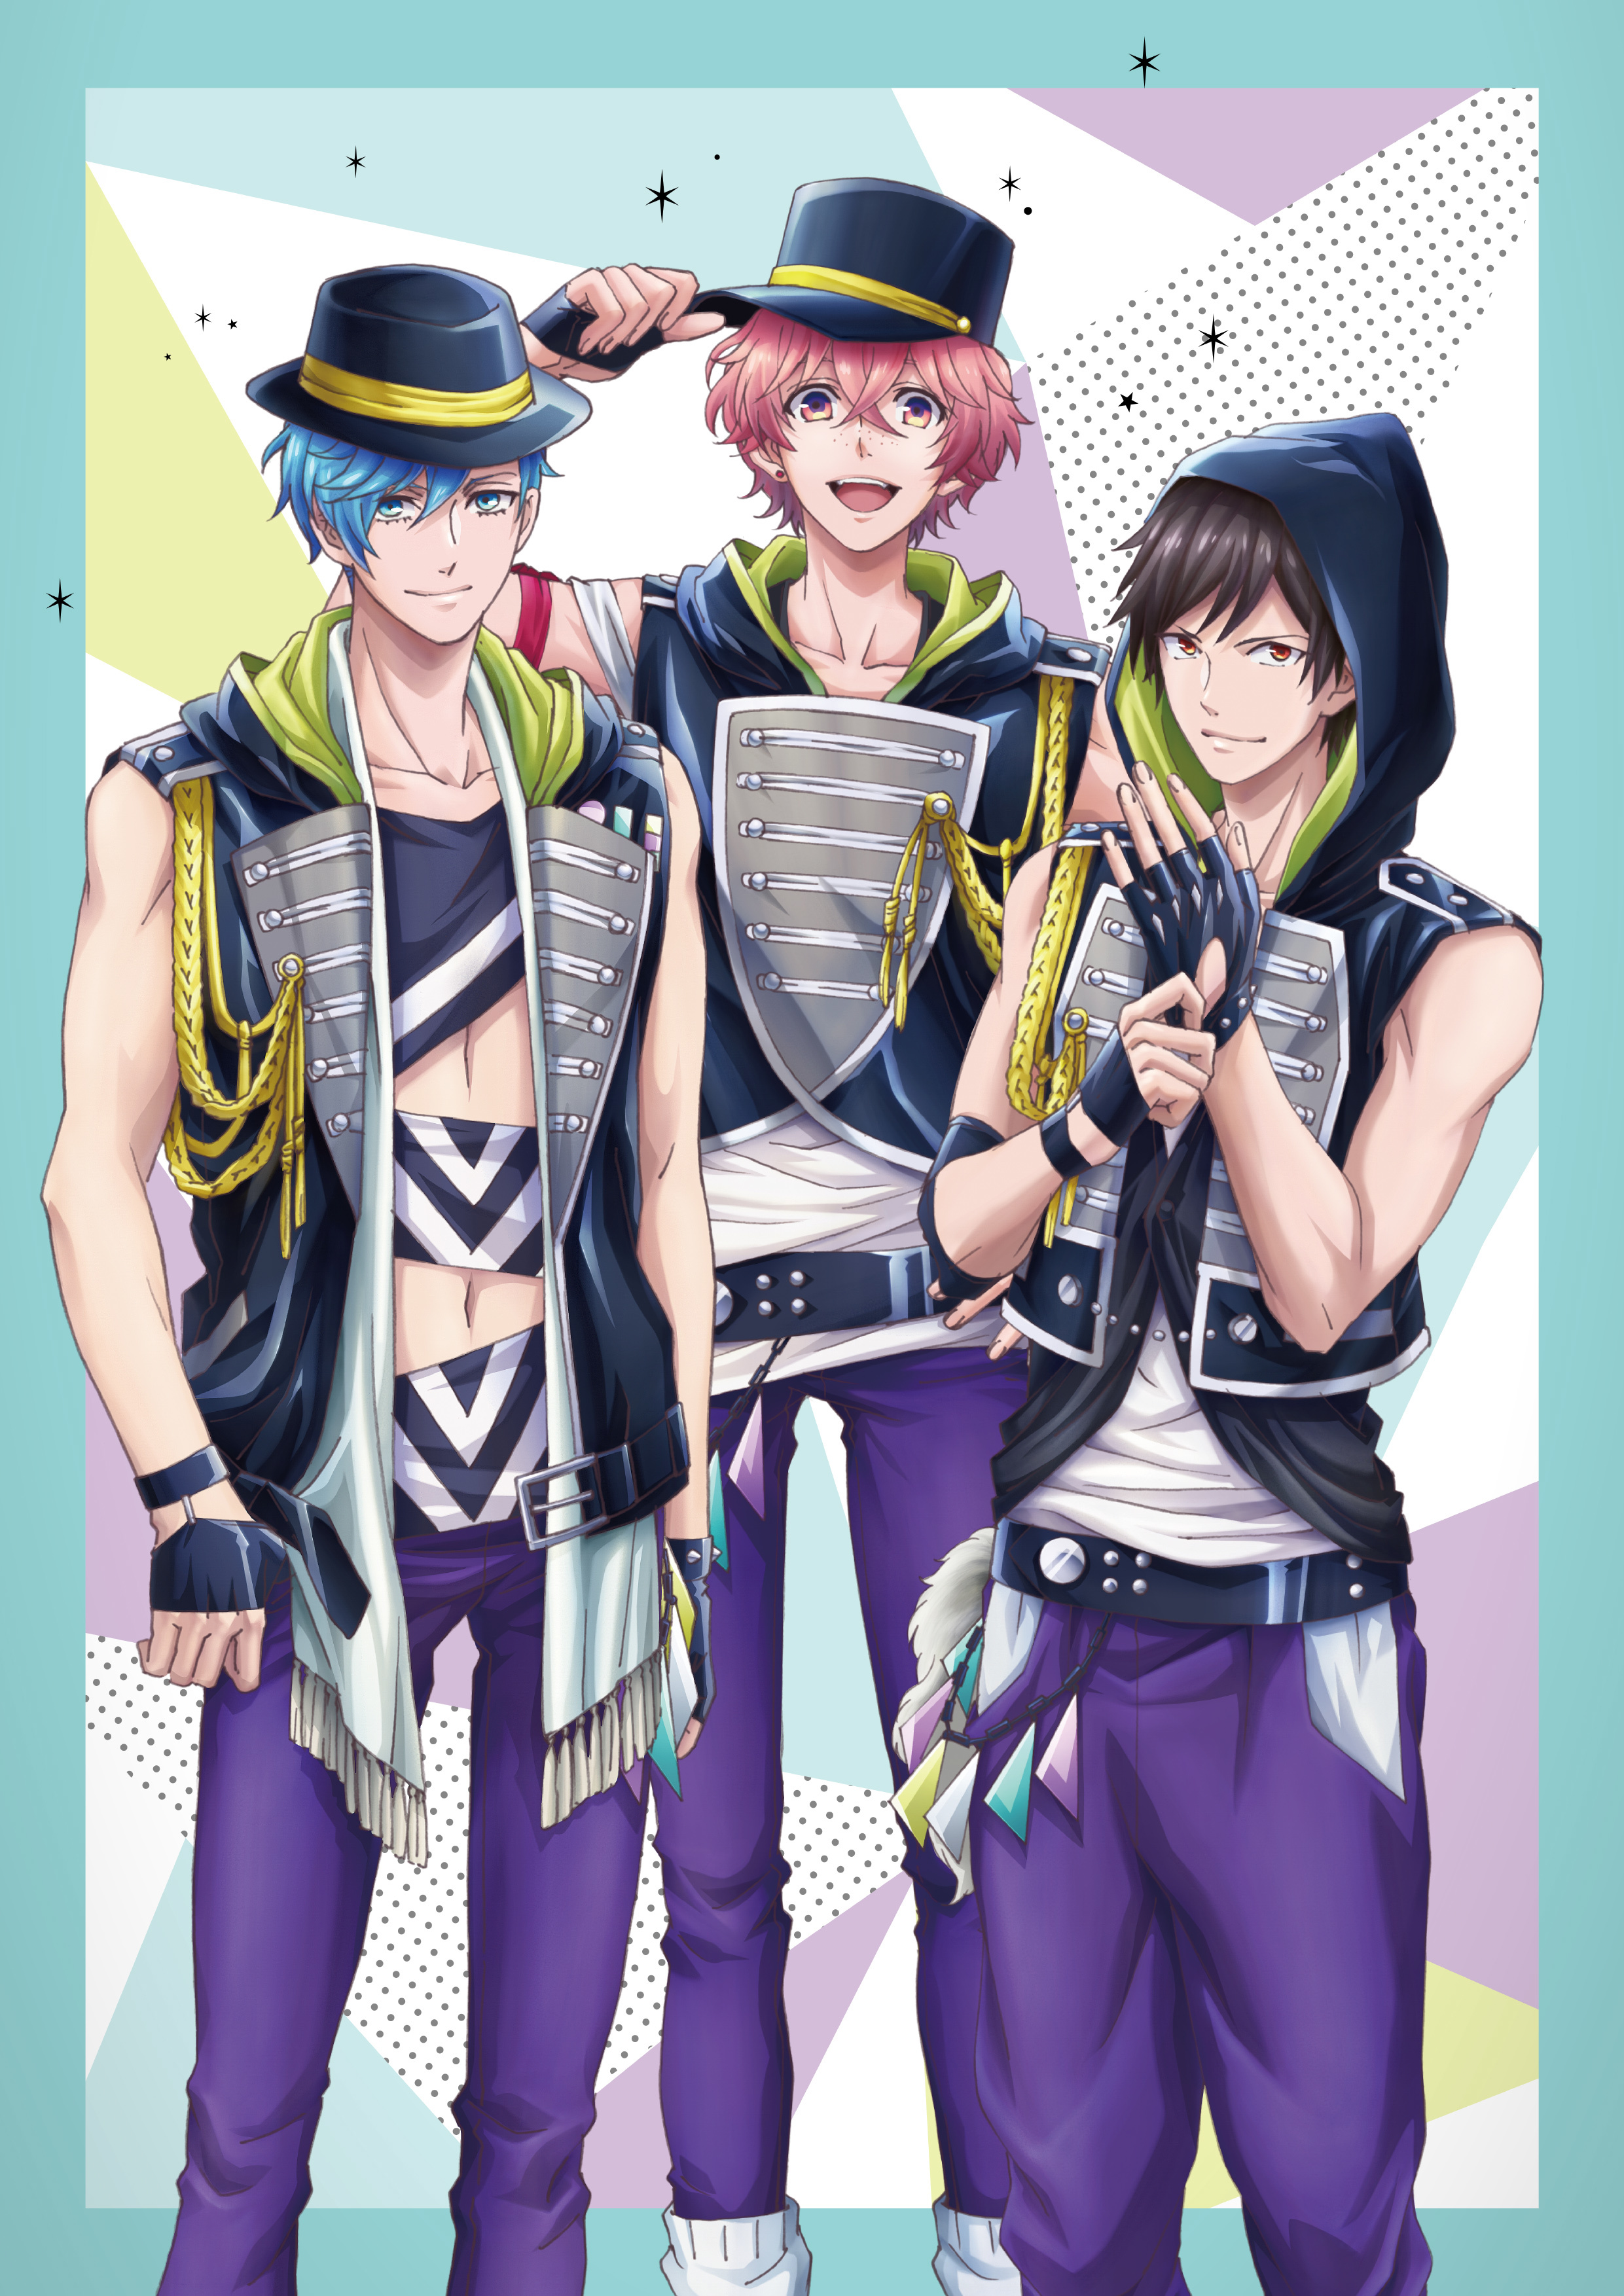 「THRIVE」 (C)MAGES.／Team B-PRO　(C)MAGES.／Team B-PRO2　(C)B-PROJECT